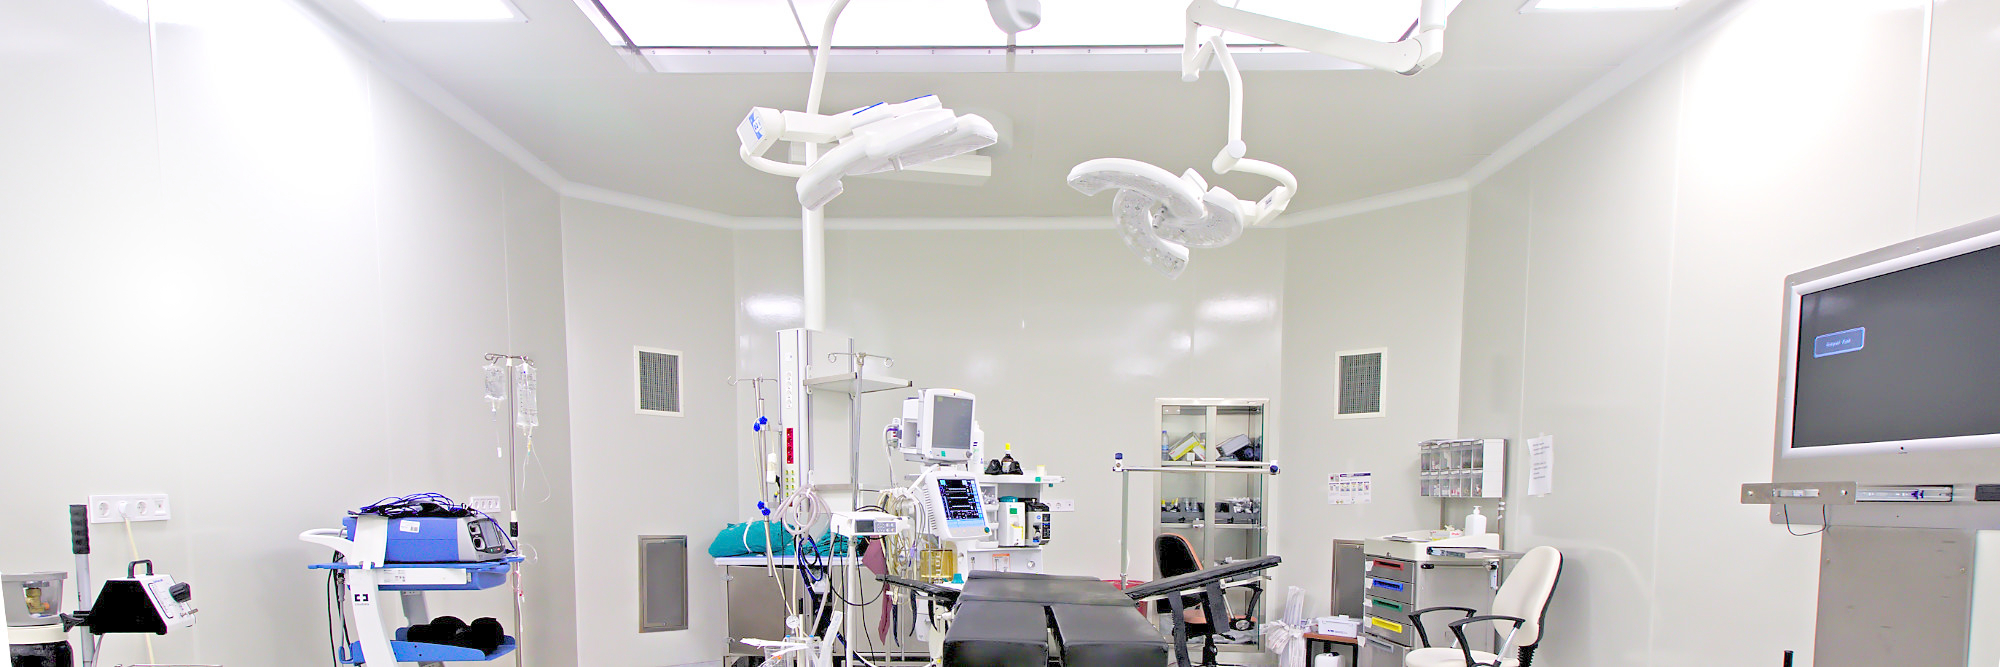 Decopan Antibacterial GRP wall ceiling operating room, delivery room, clinic, intensive care